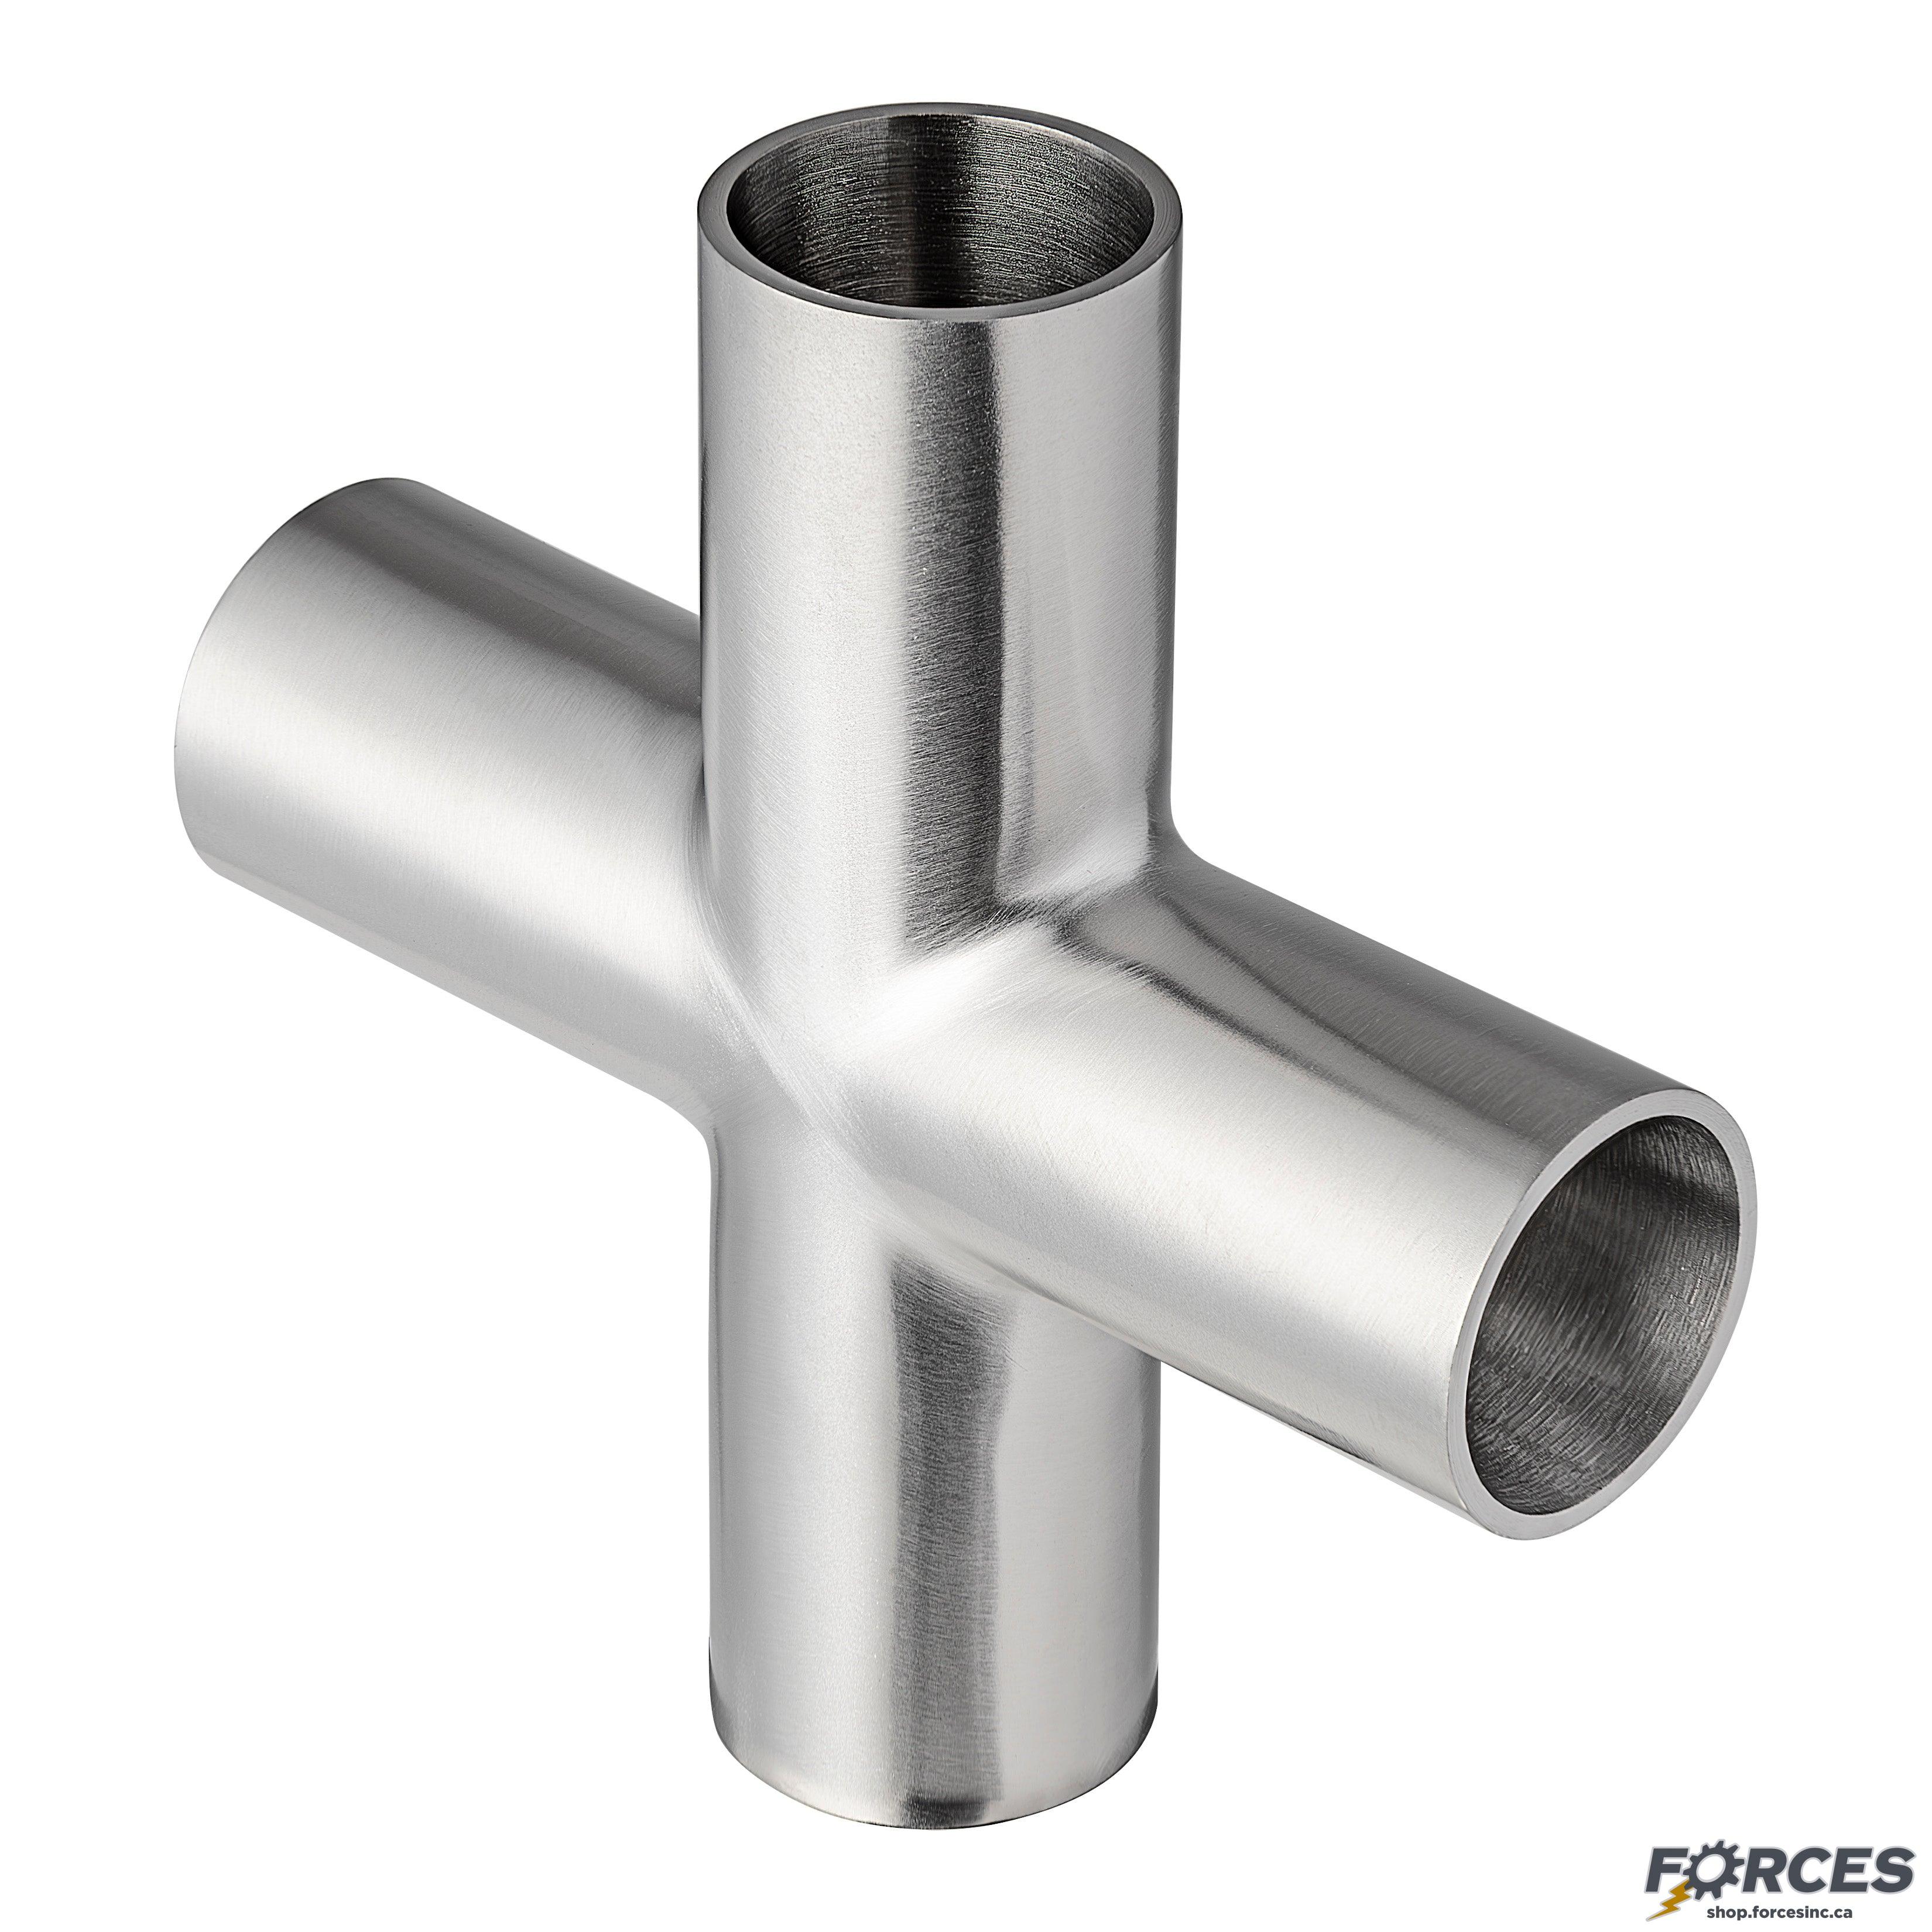 2" Butt Weld long Cross - Stainless Steel 316 - Forces Inc